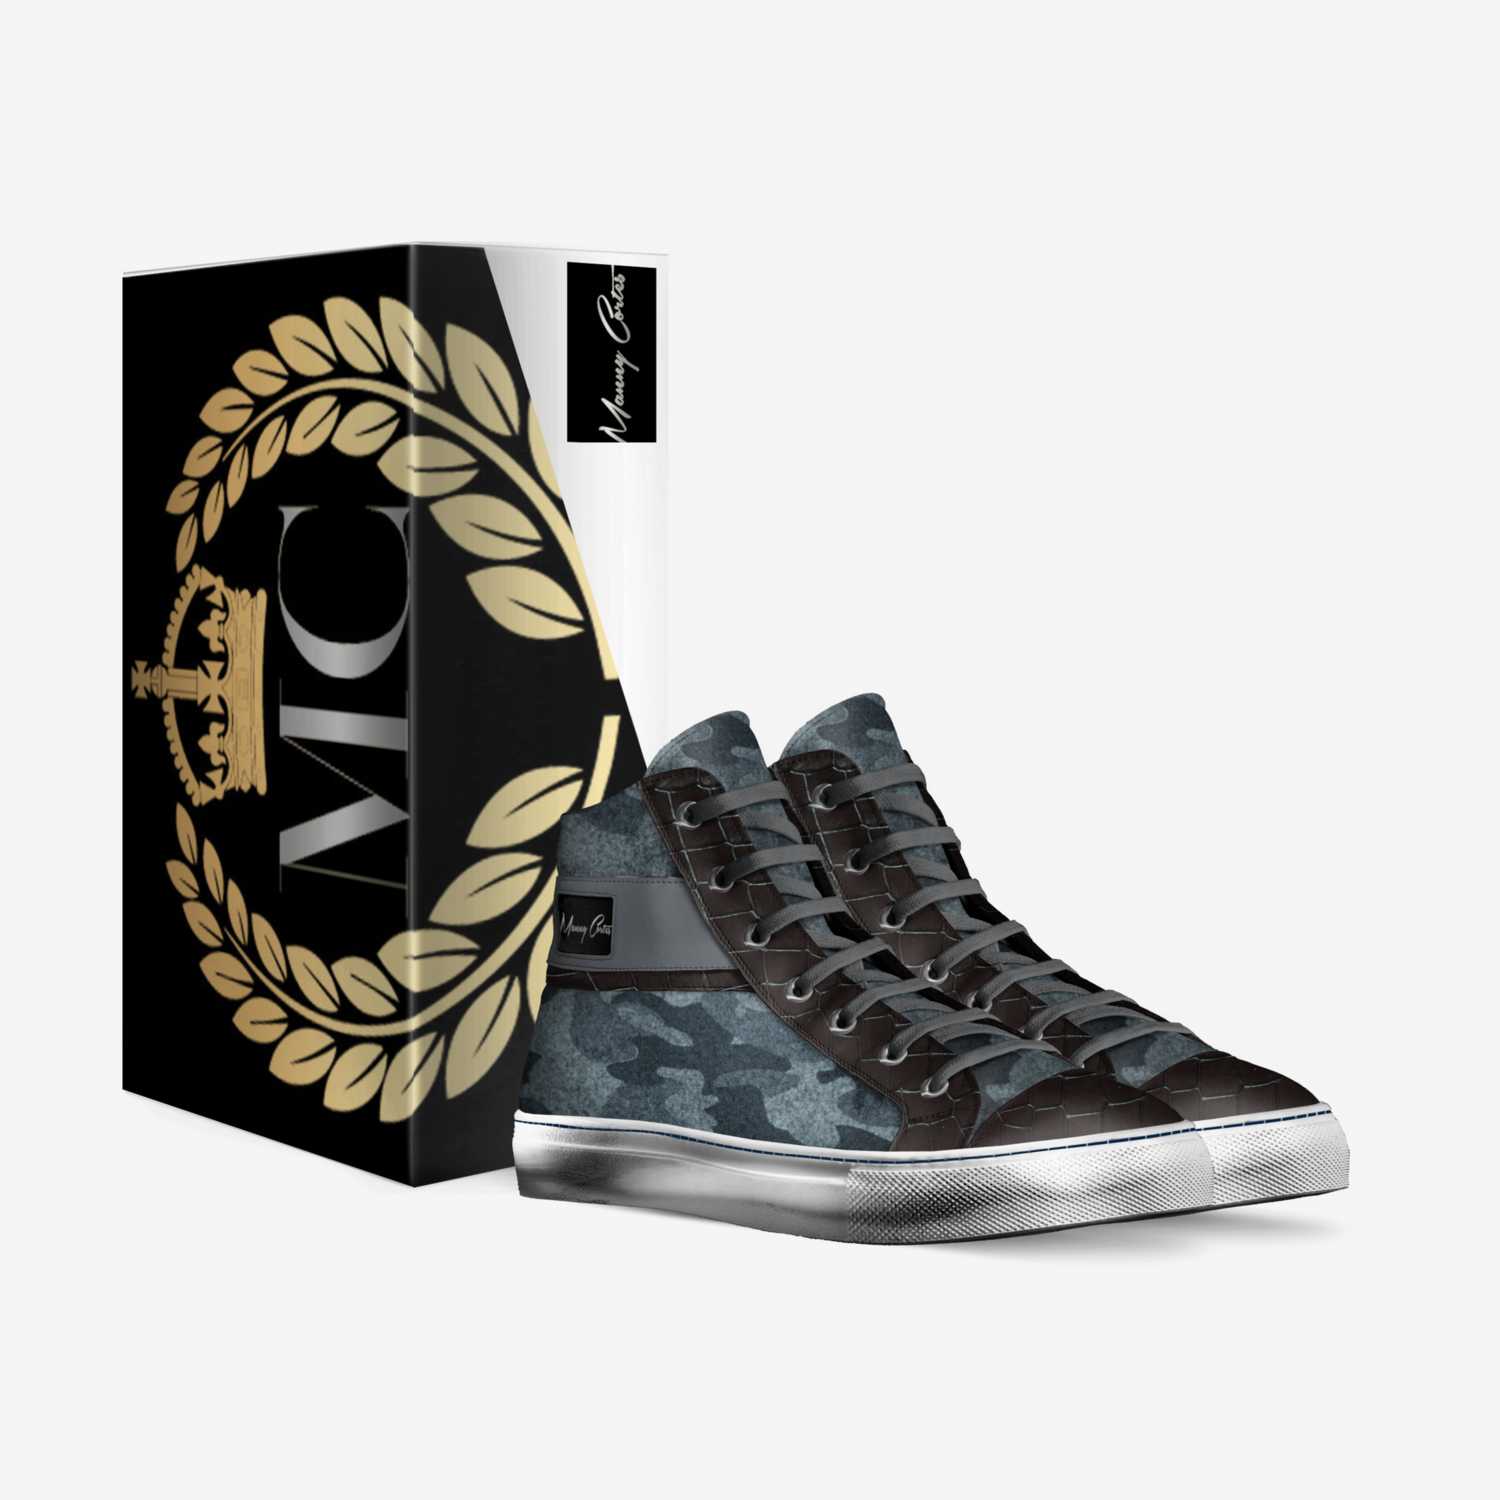 Stilo Fresh custom made in Italy shoes by Manny Cortes | Box view